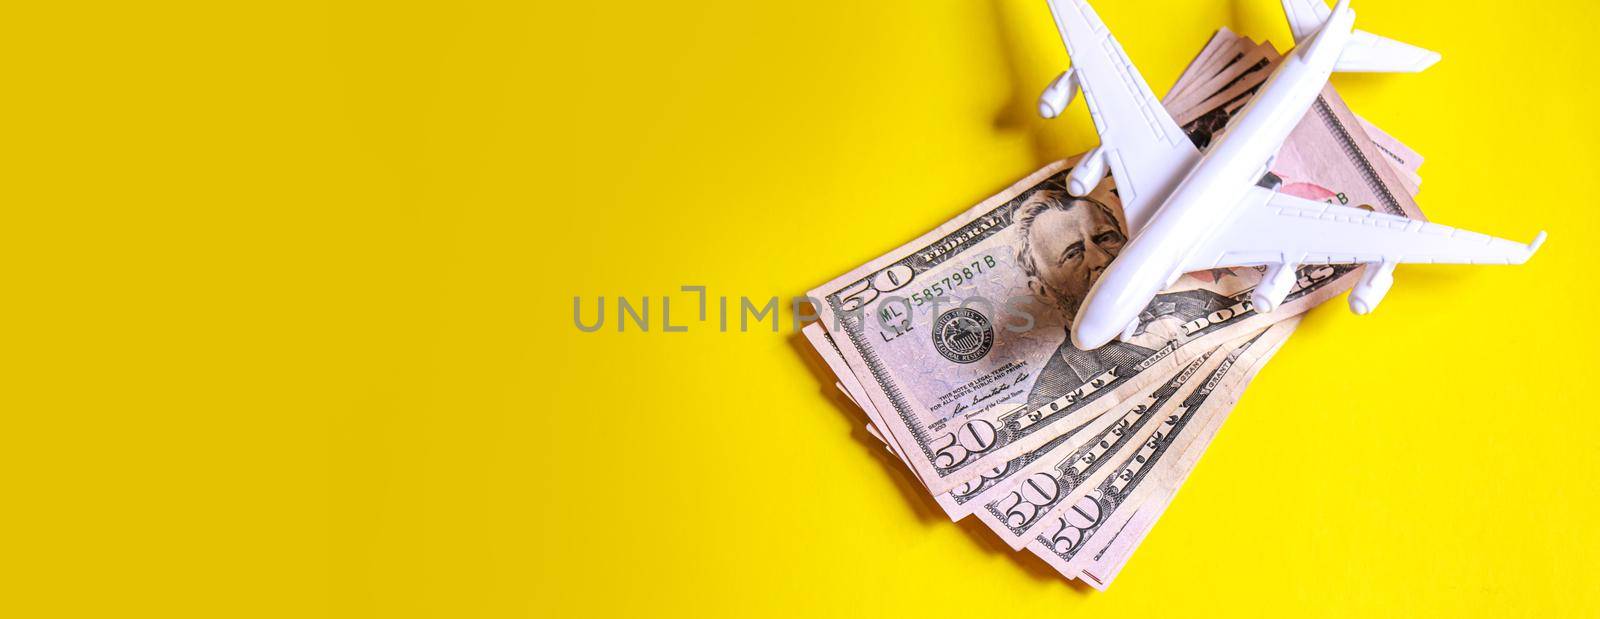 Travel preparation concept of airplane, money, passport, on yellow background. Selective focus by mila1784